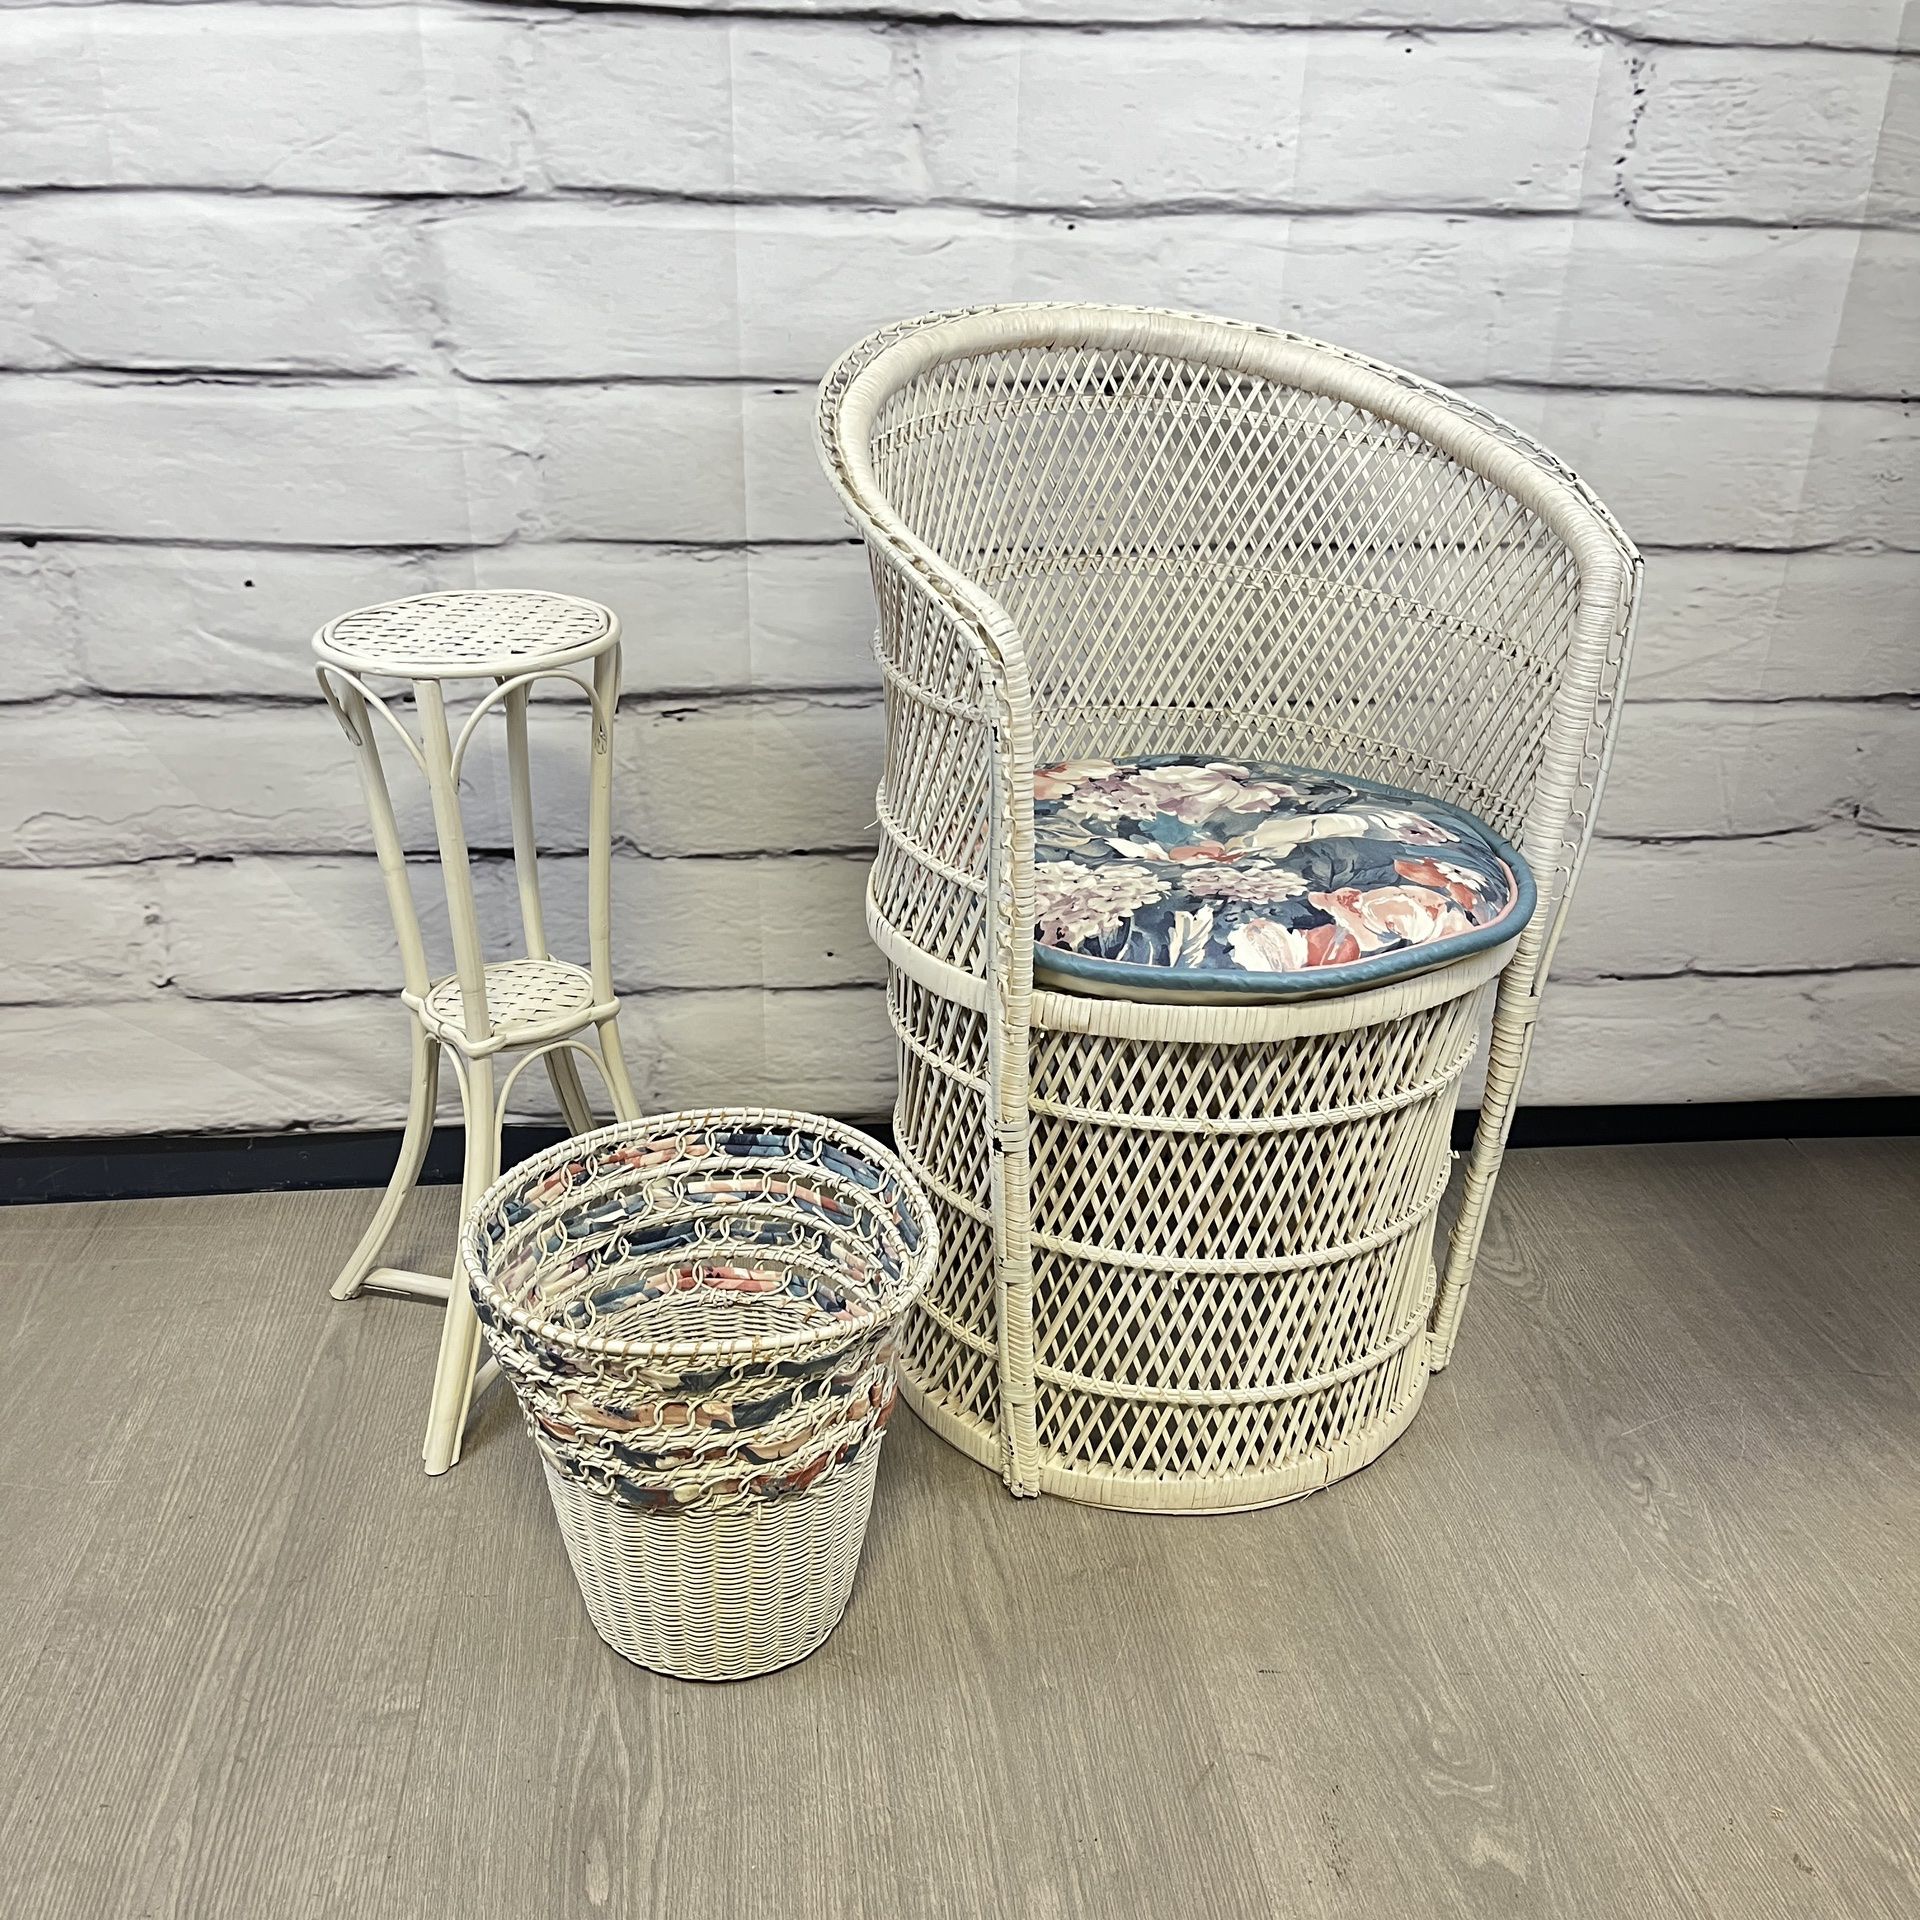 Vintage White Wicker Bucket Barrel Chair, Plant Stand & Trash Can Basket